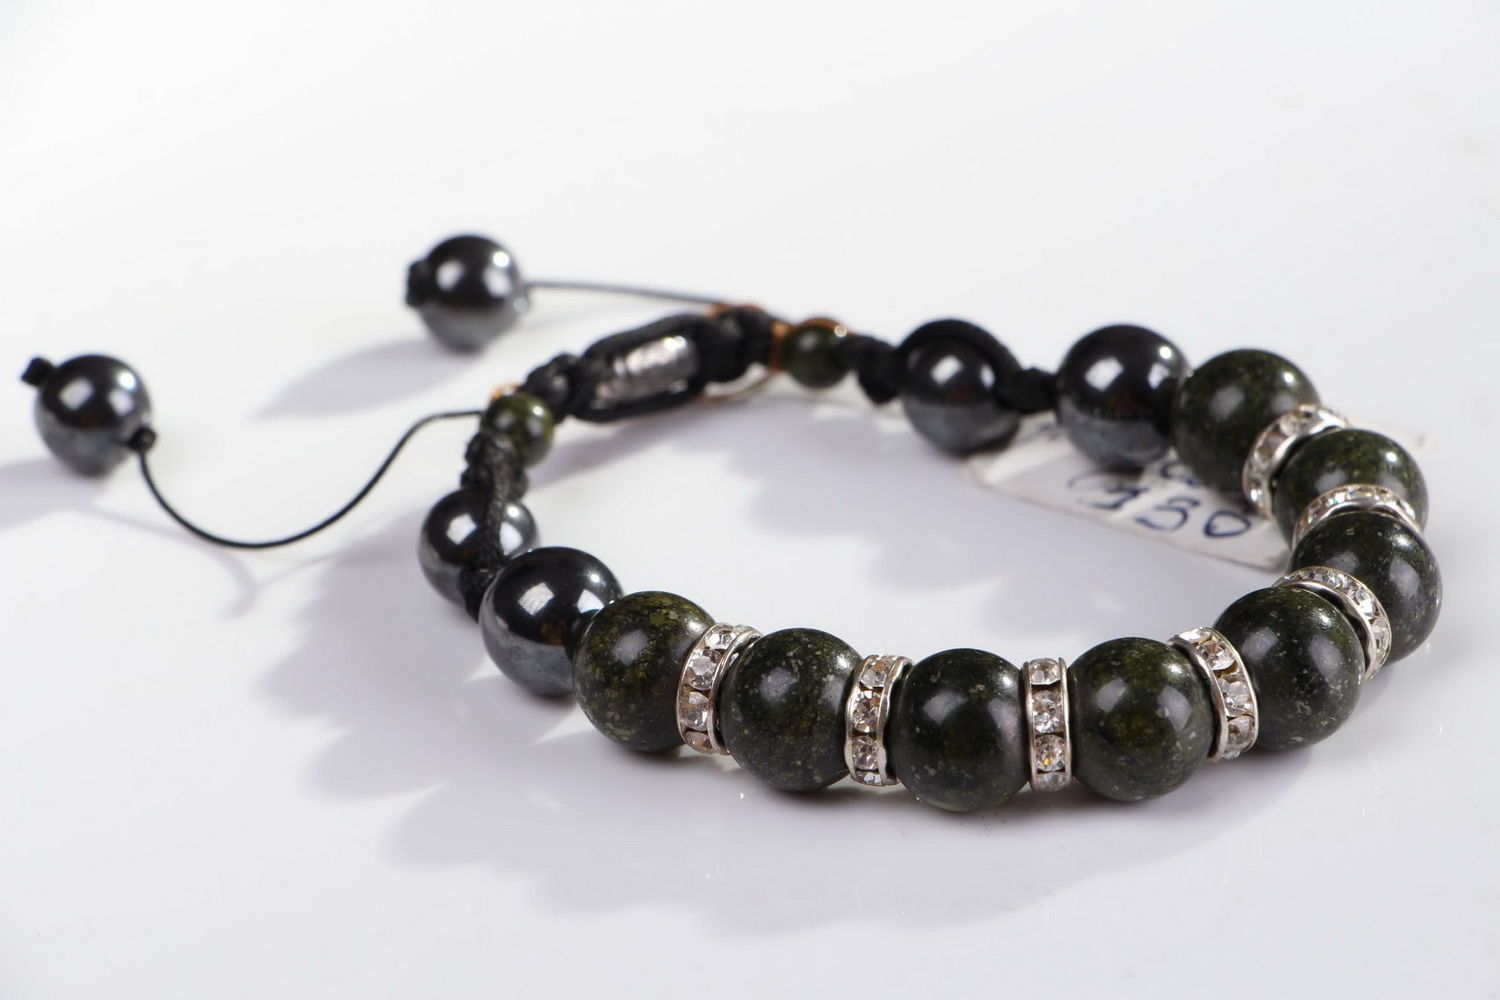 Bracelet made from serpentine beads and hematite photo 3